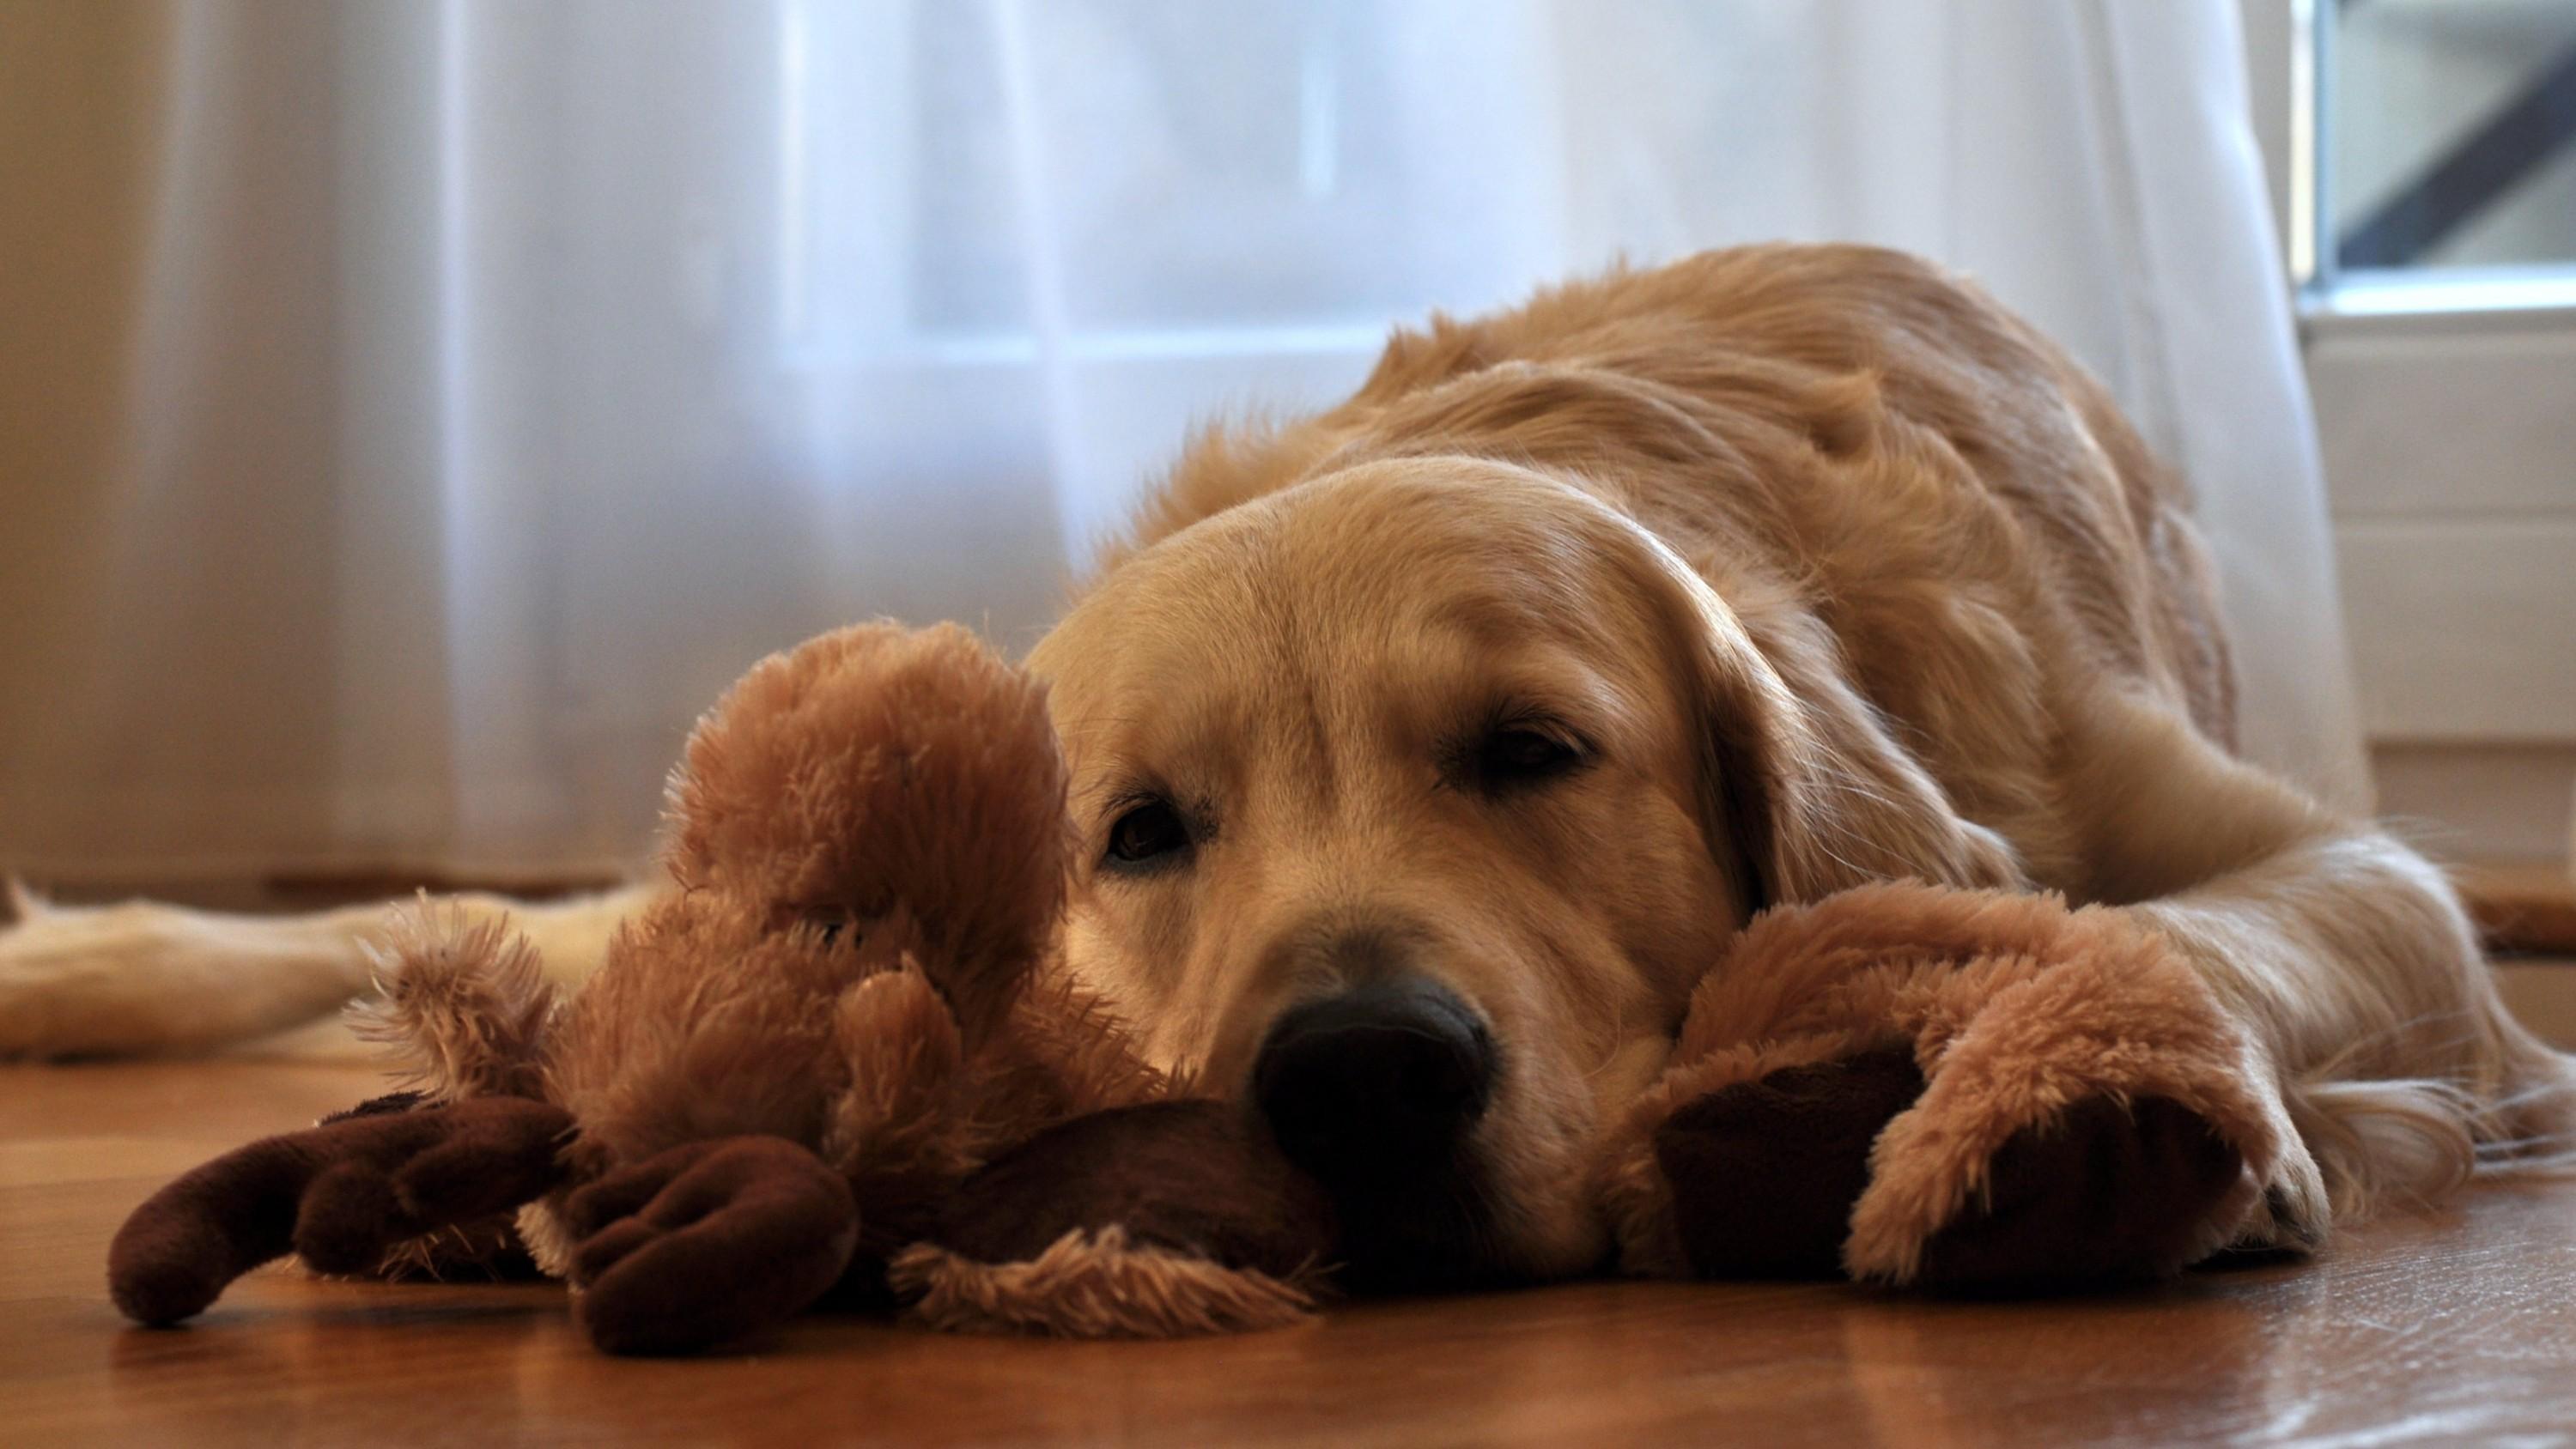 Download 3000x1688 Golden Retriever, Lying Down, Lazy, Dogs